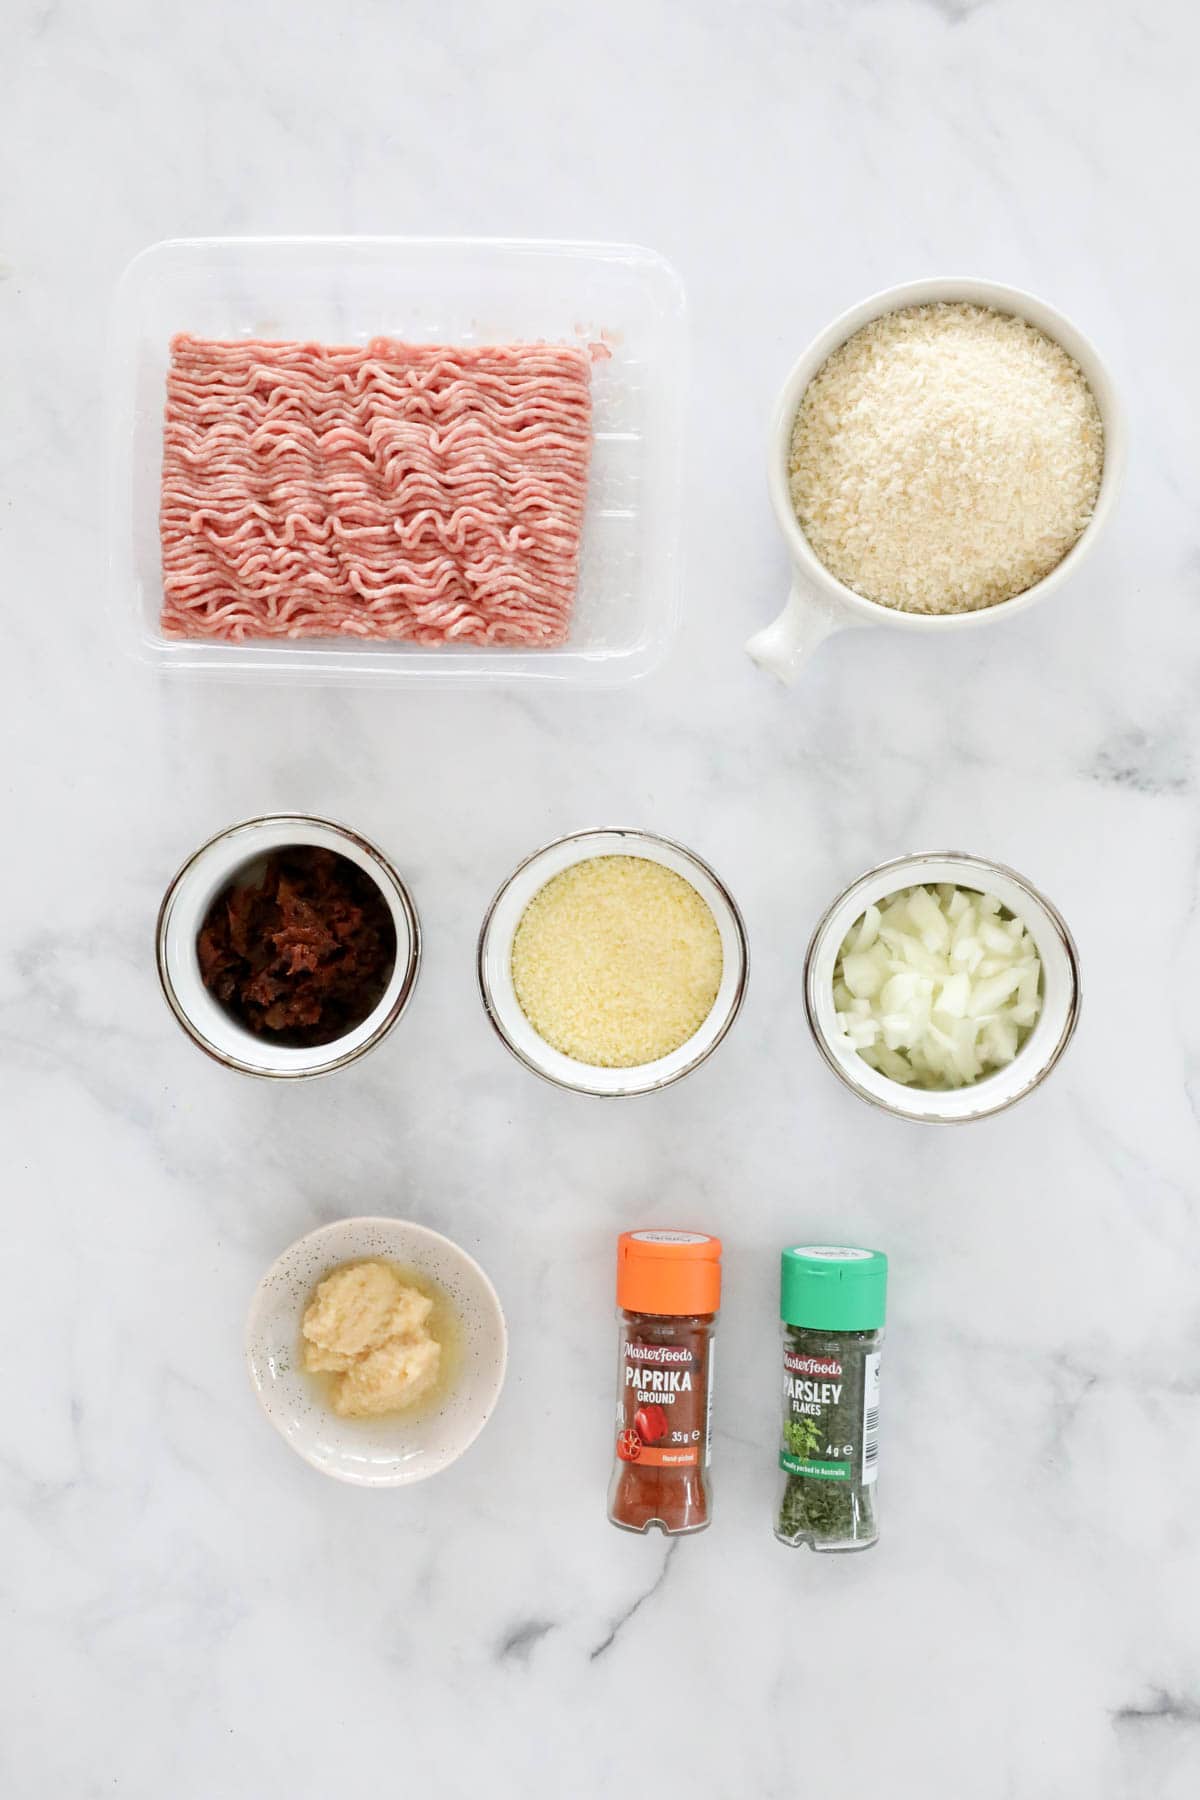 Ingredients needed to make the pork meatballs measured out in individual bowls.